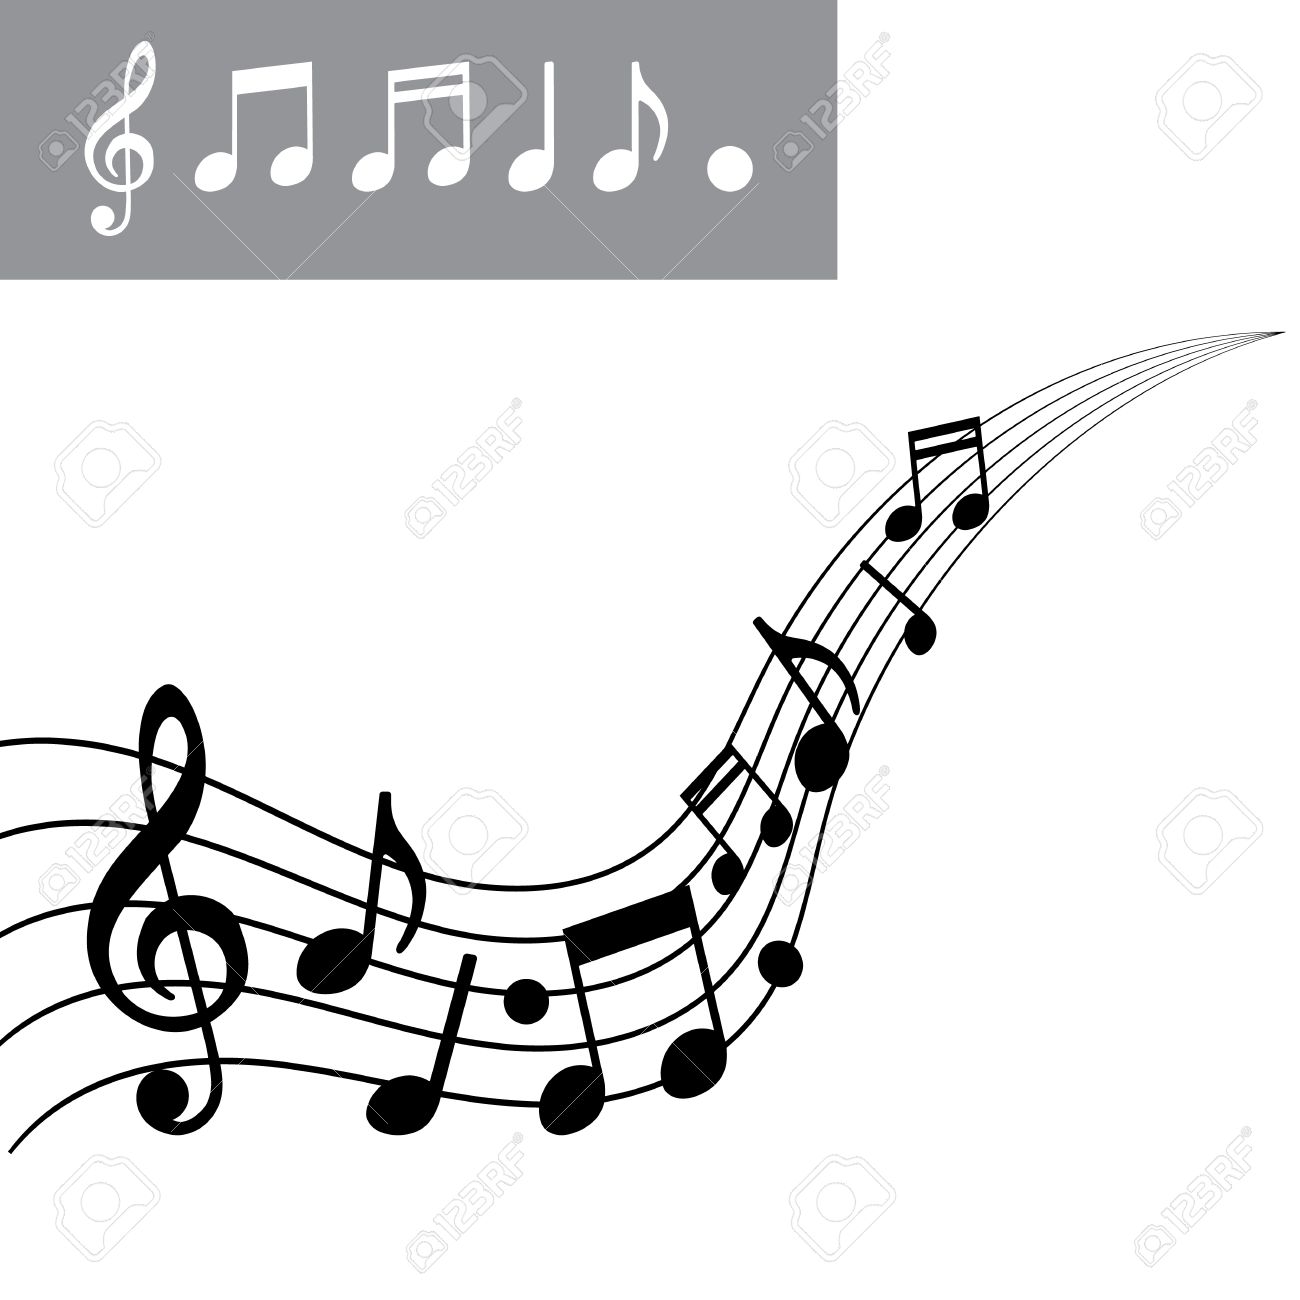 musical notes icon Stock Photo: 138944622 - Alamy